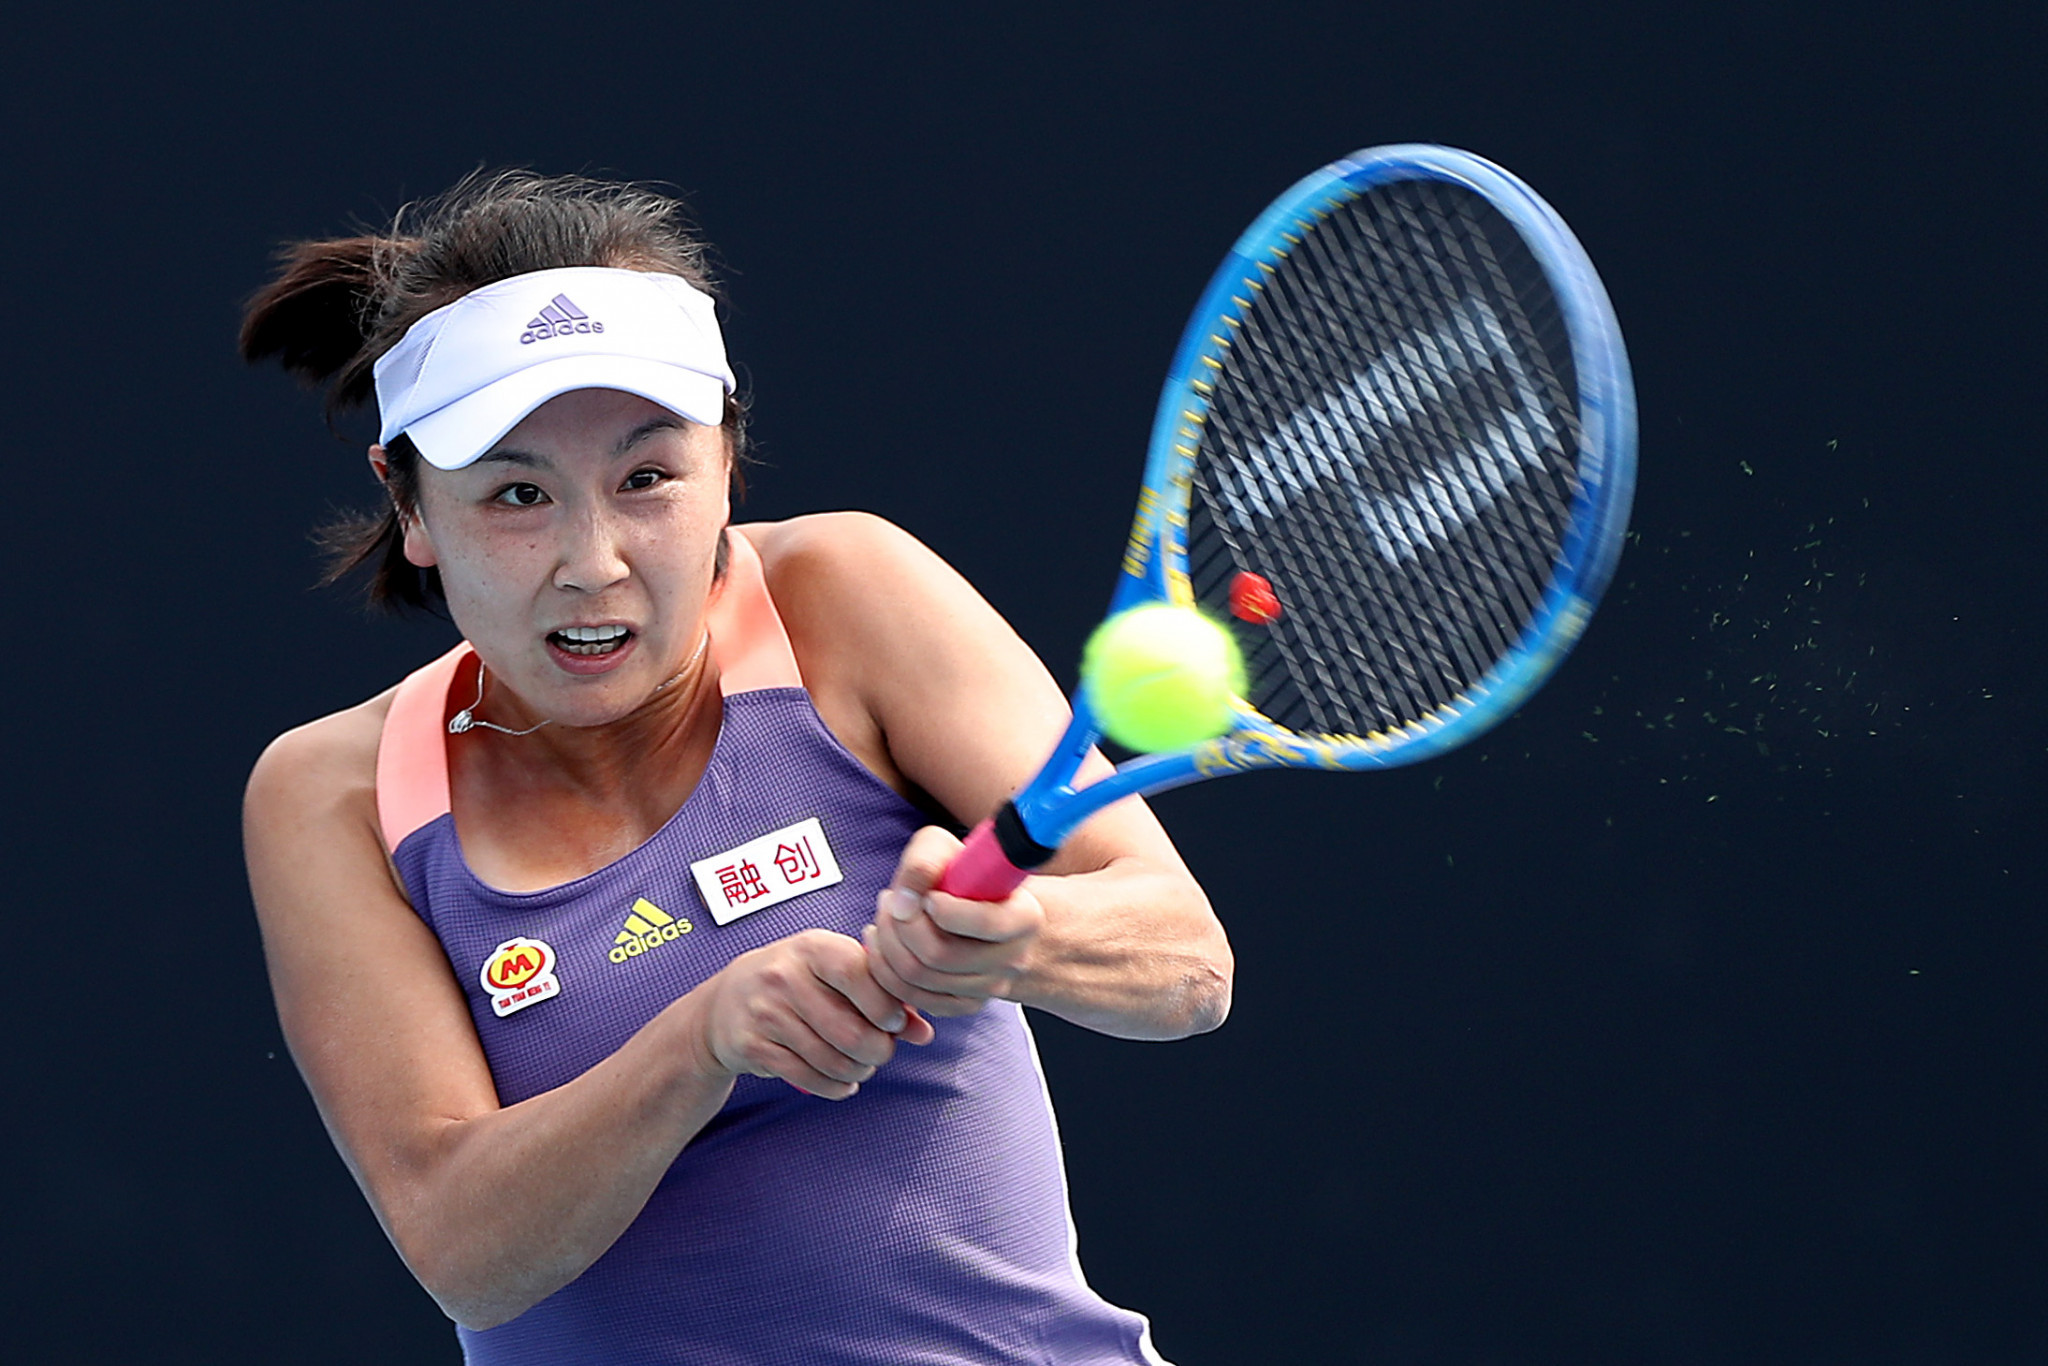 Simon claims Peng Shuai is safe and WTA knows where she is